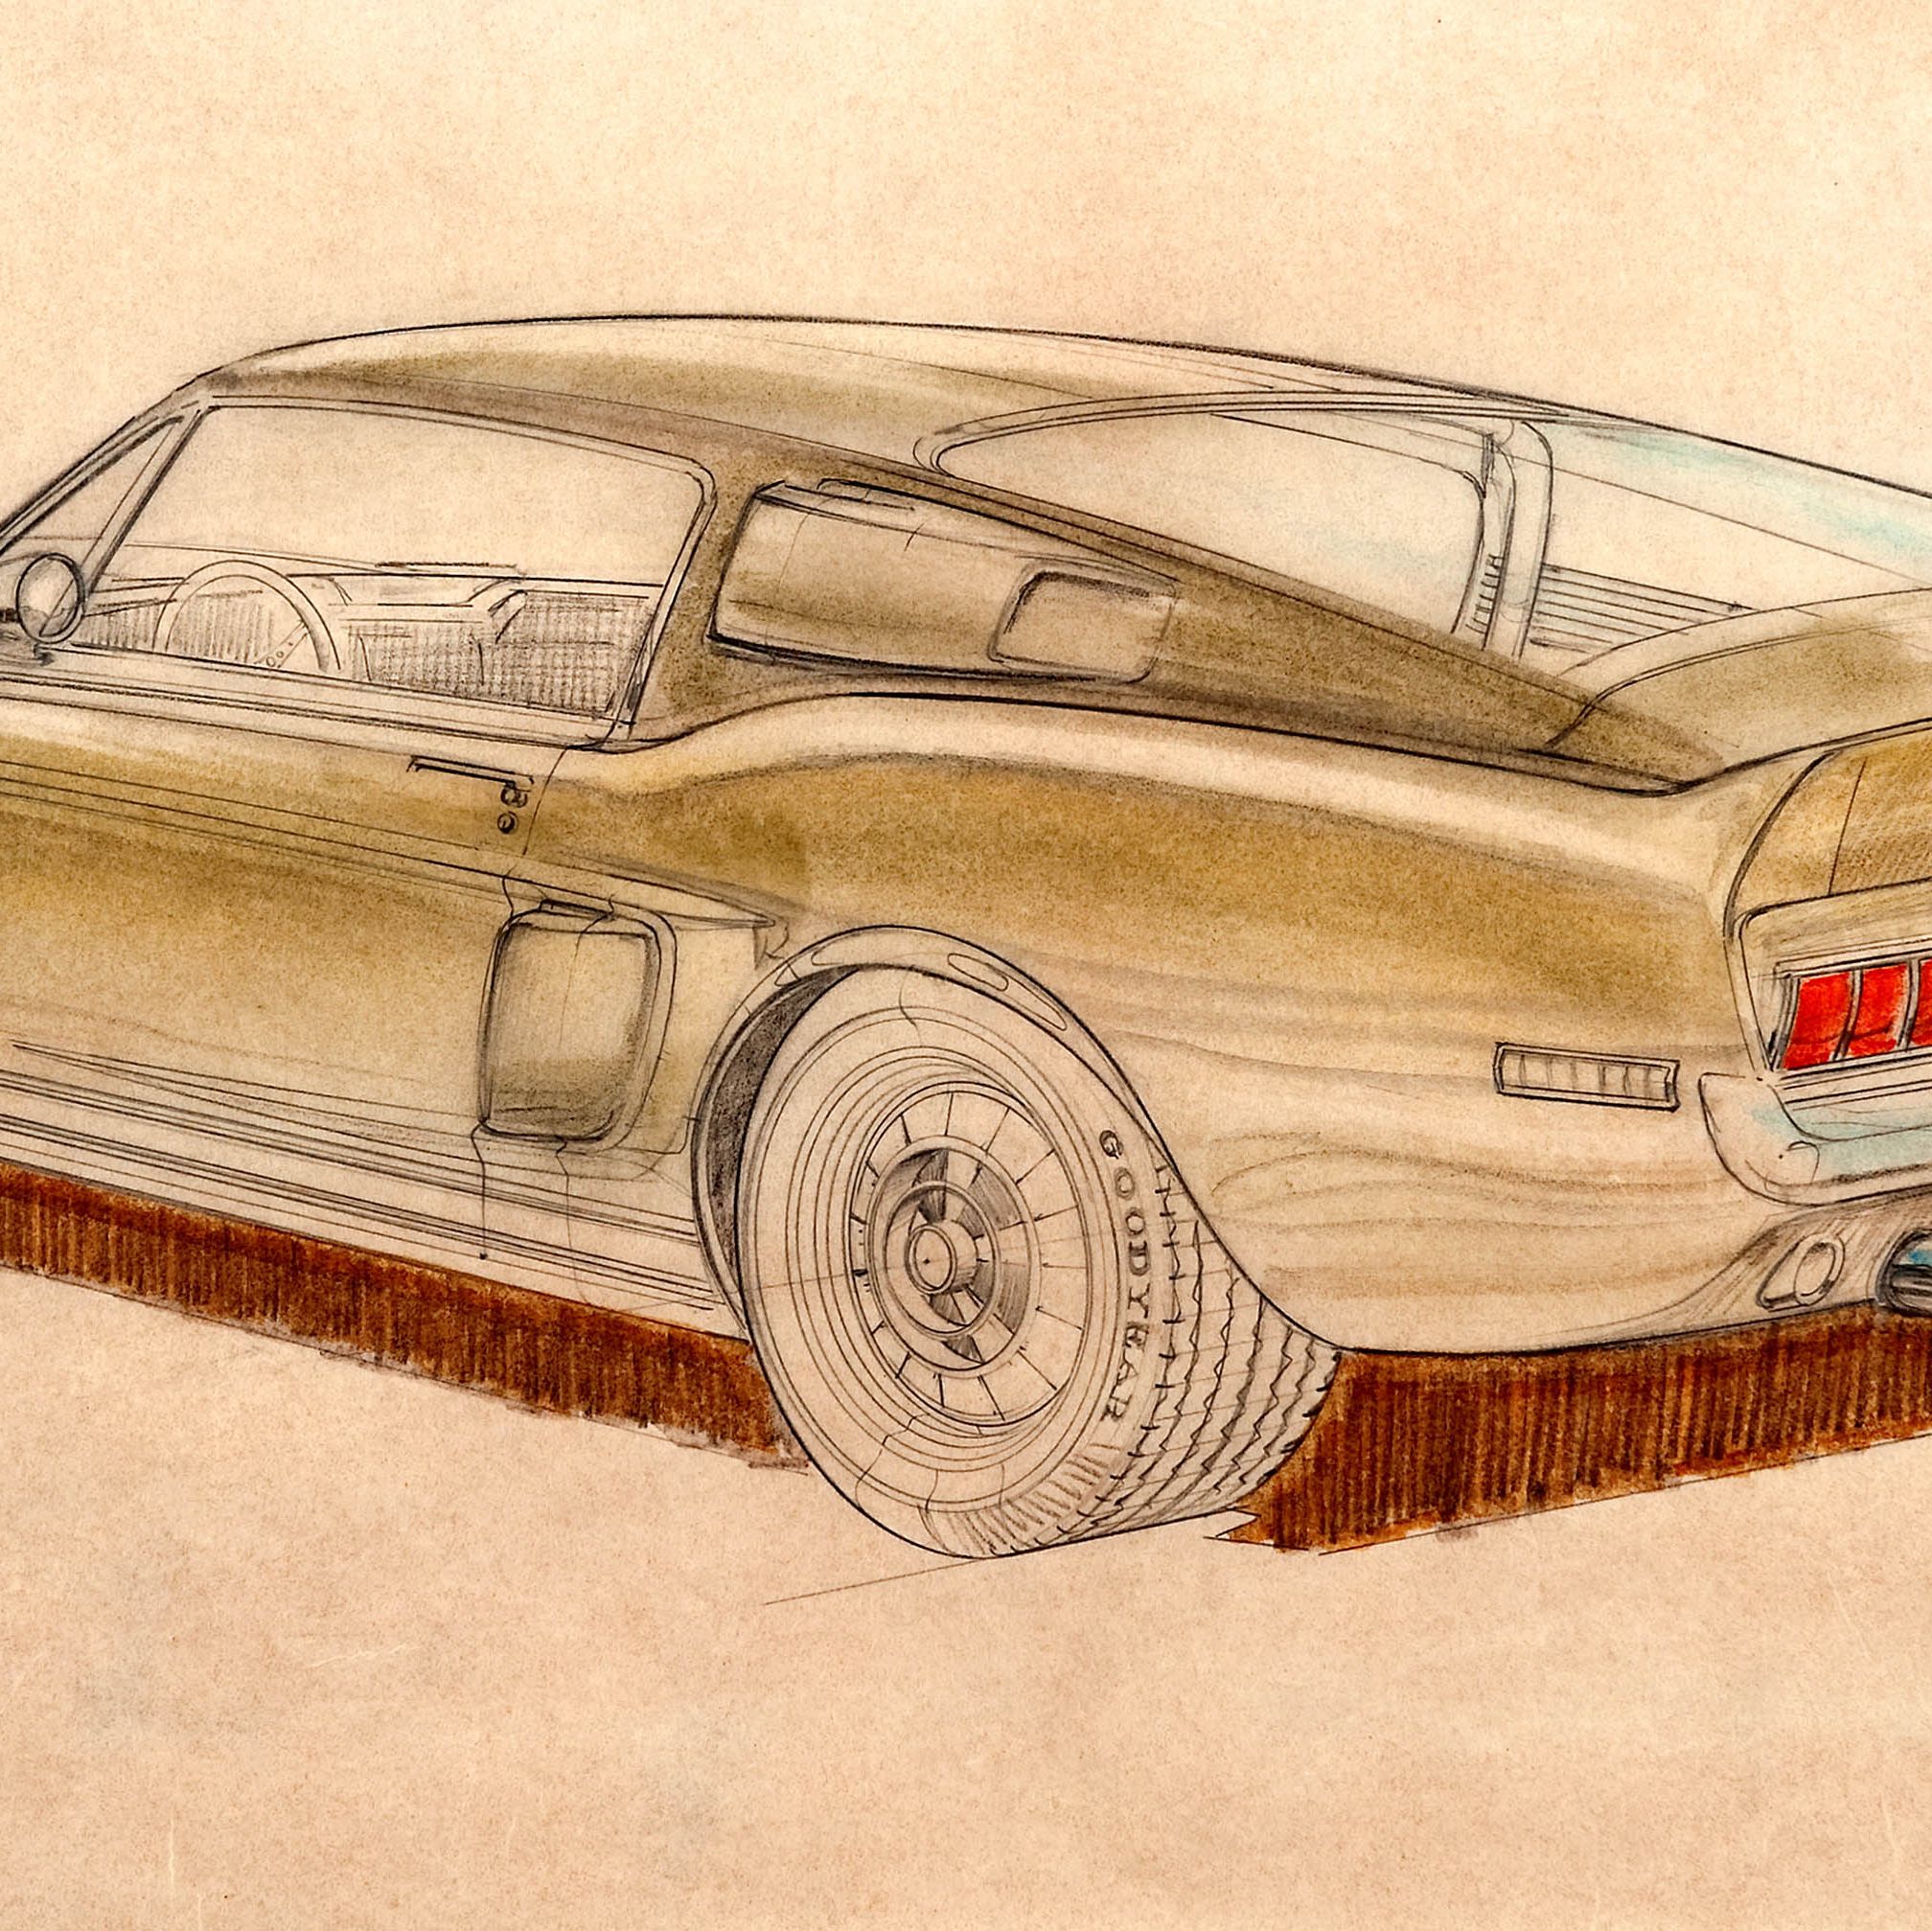 shelby mustang 1967 drawing